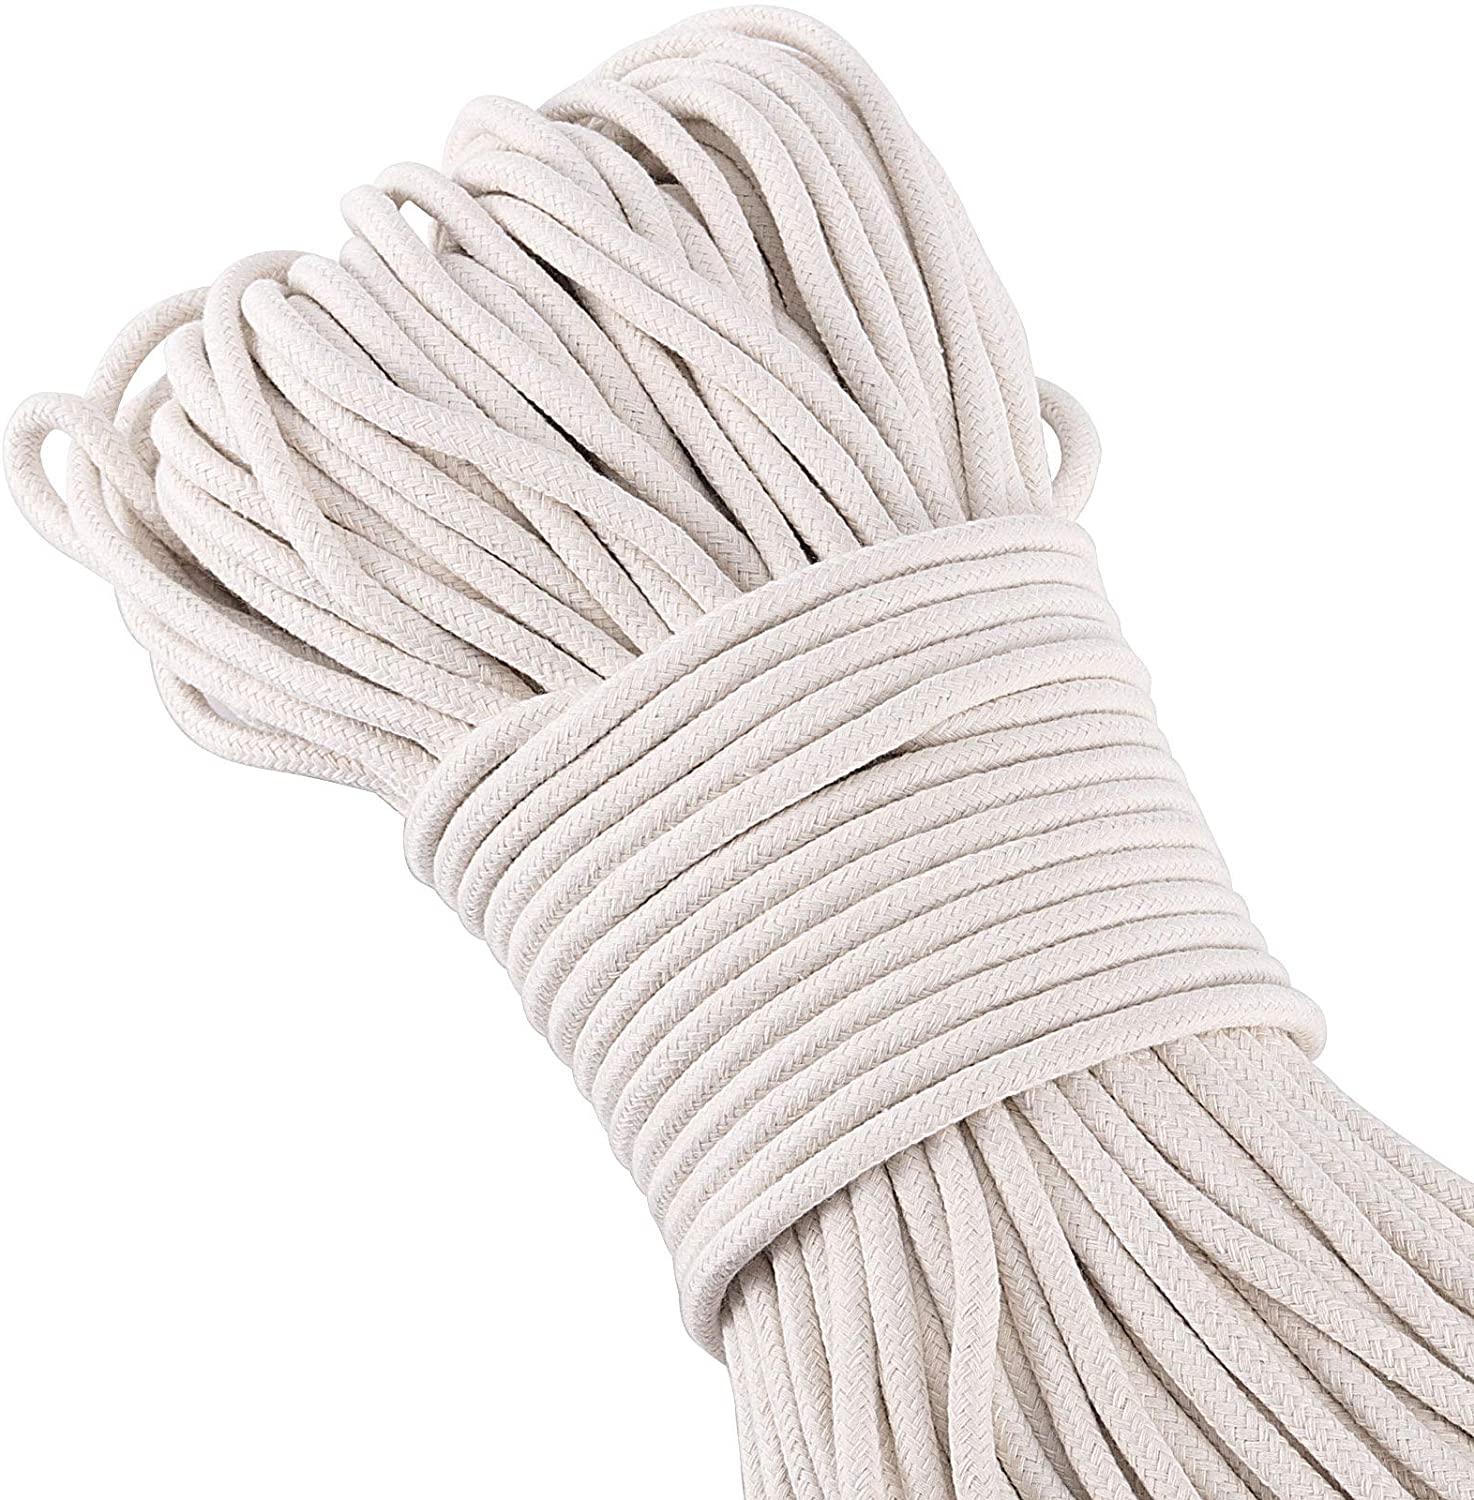 Cotton Ropes in Ropes 